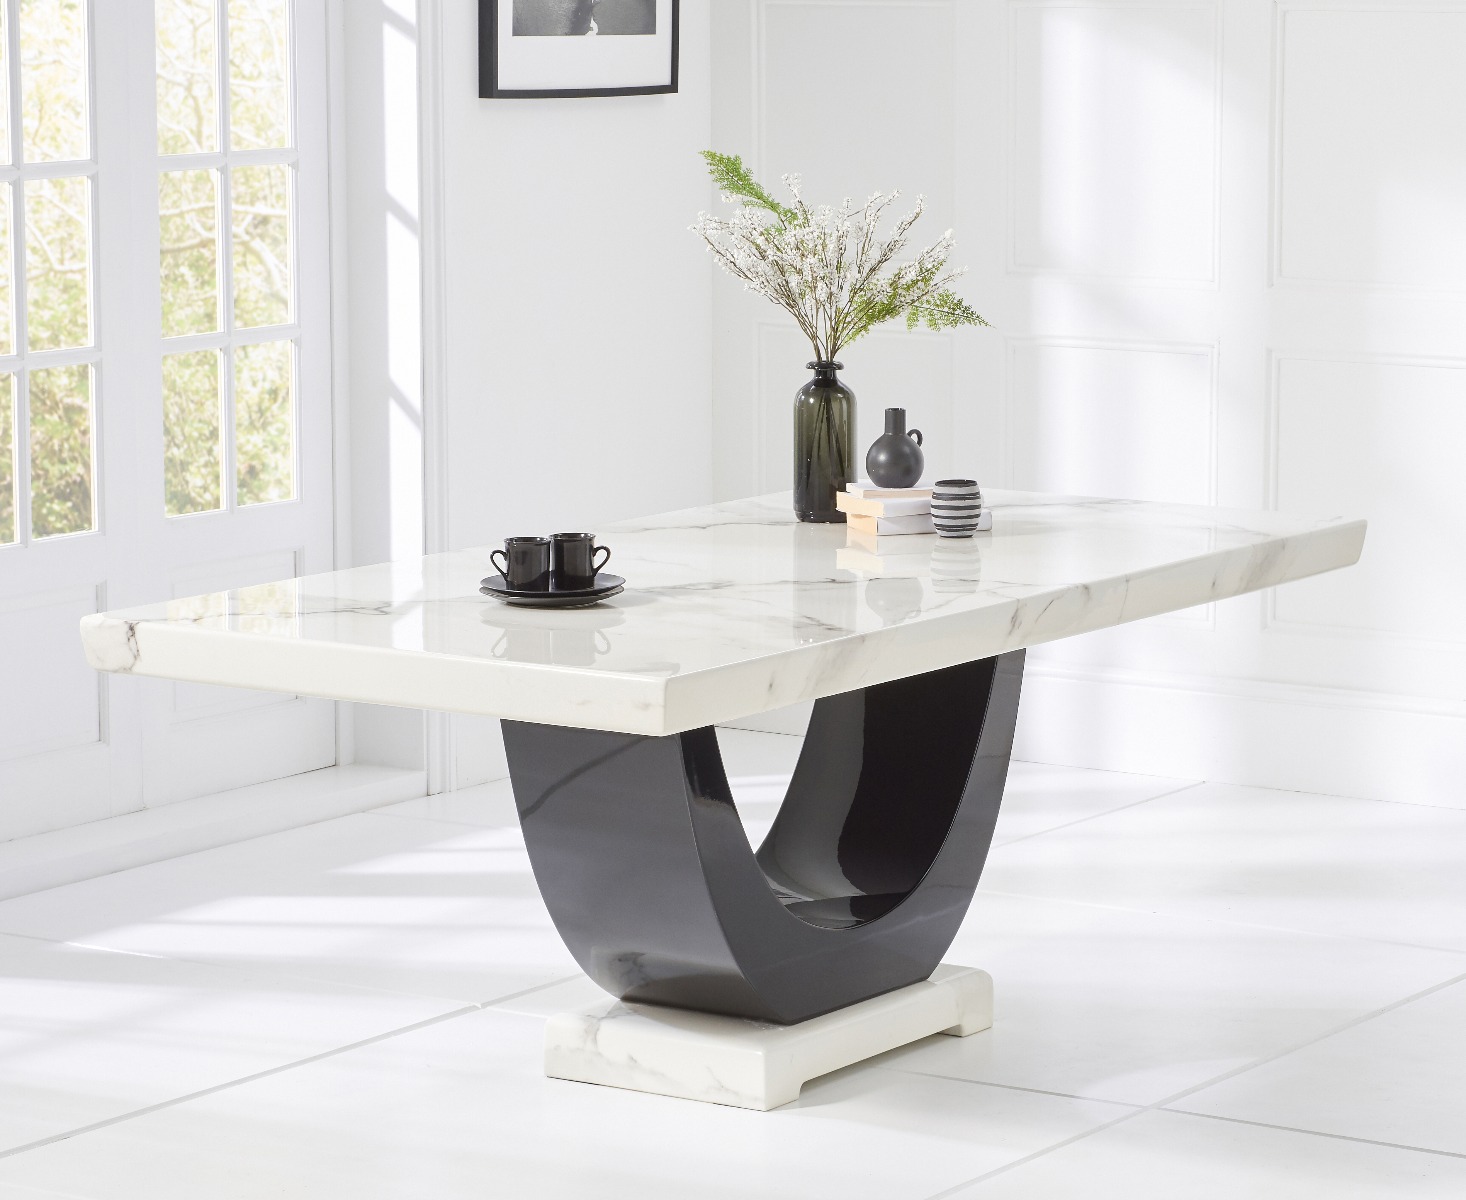 Photo 3 of Raphael 170cm white and black pedestal marble dining table with 4 cream francesca chairs